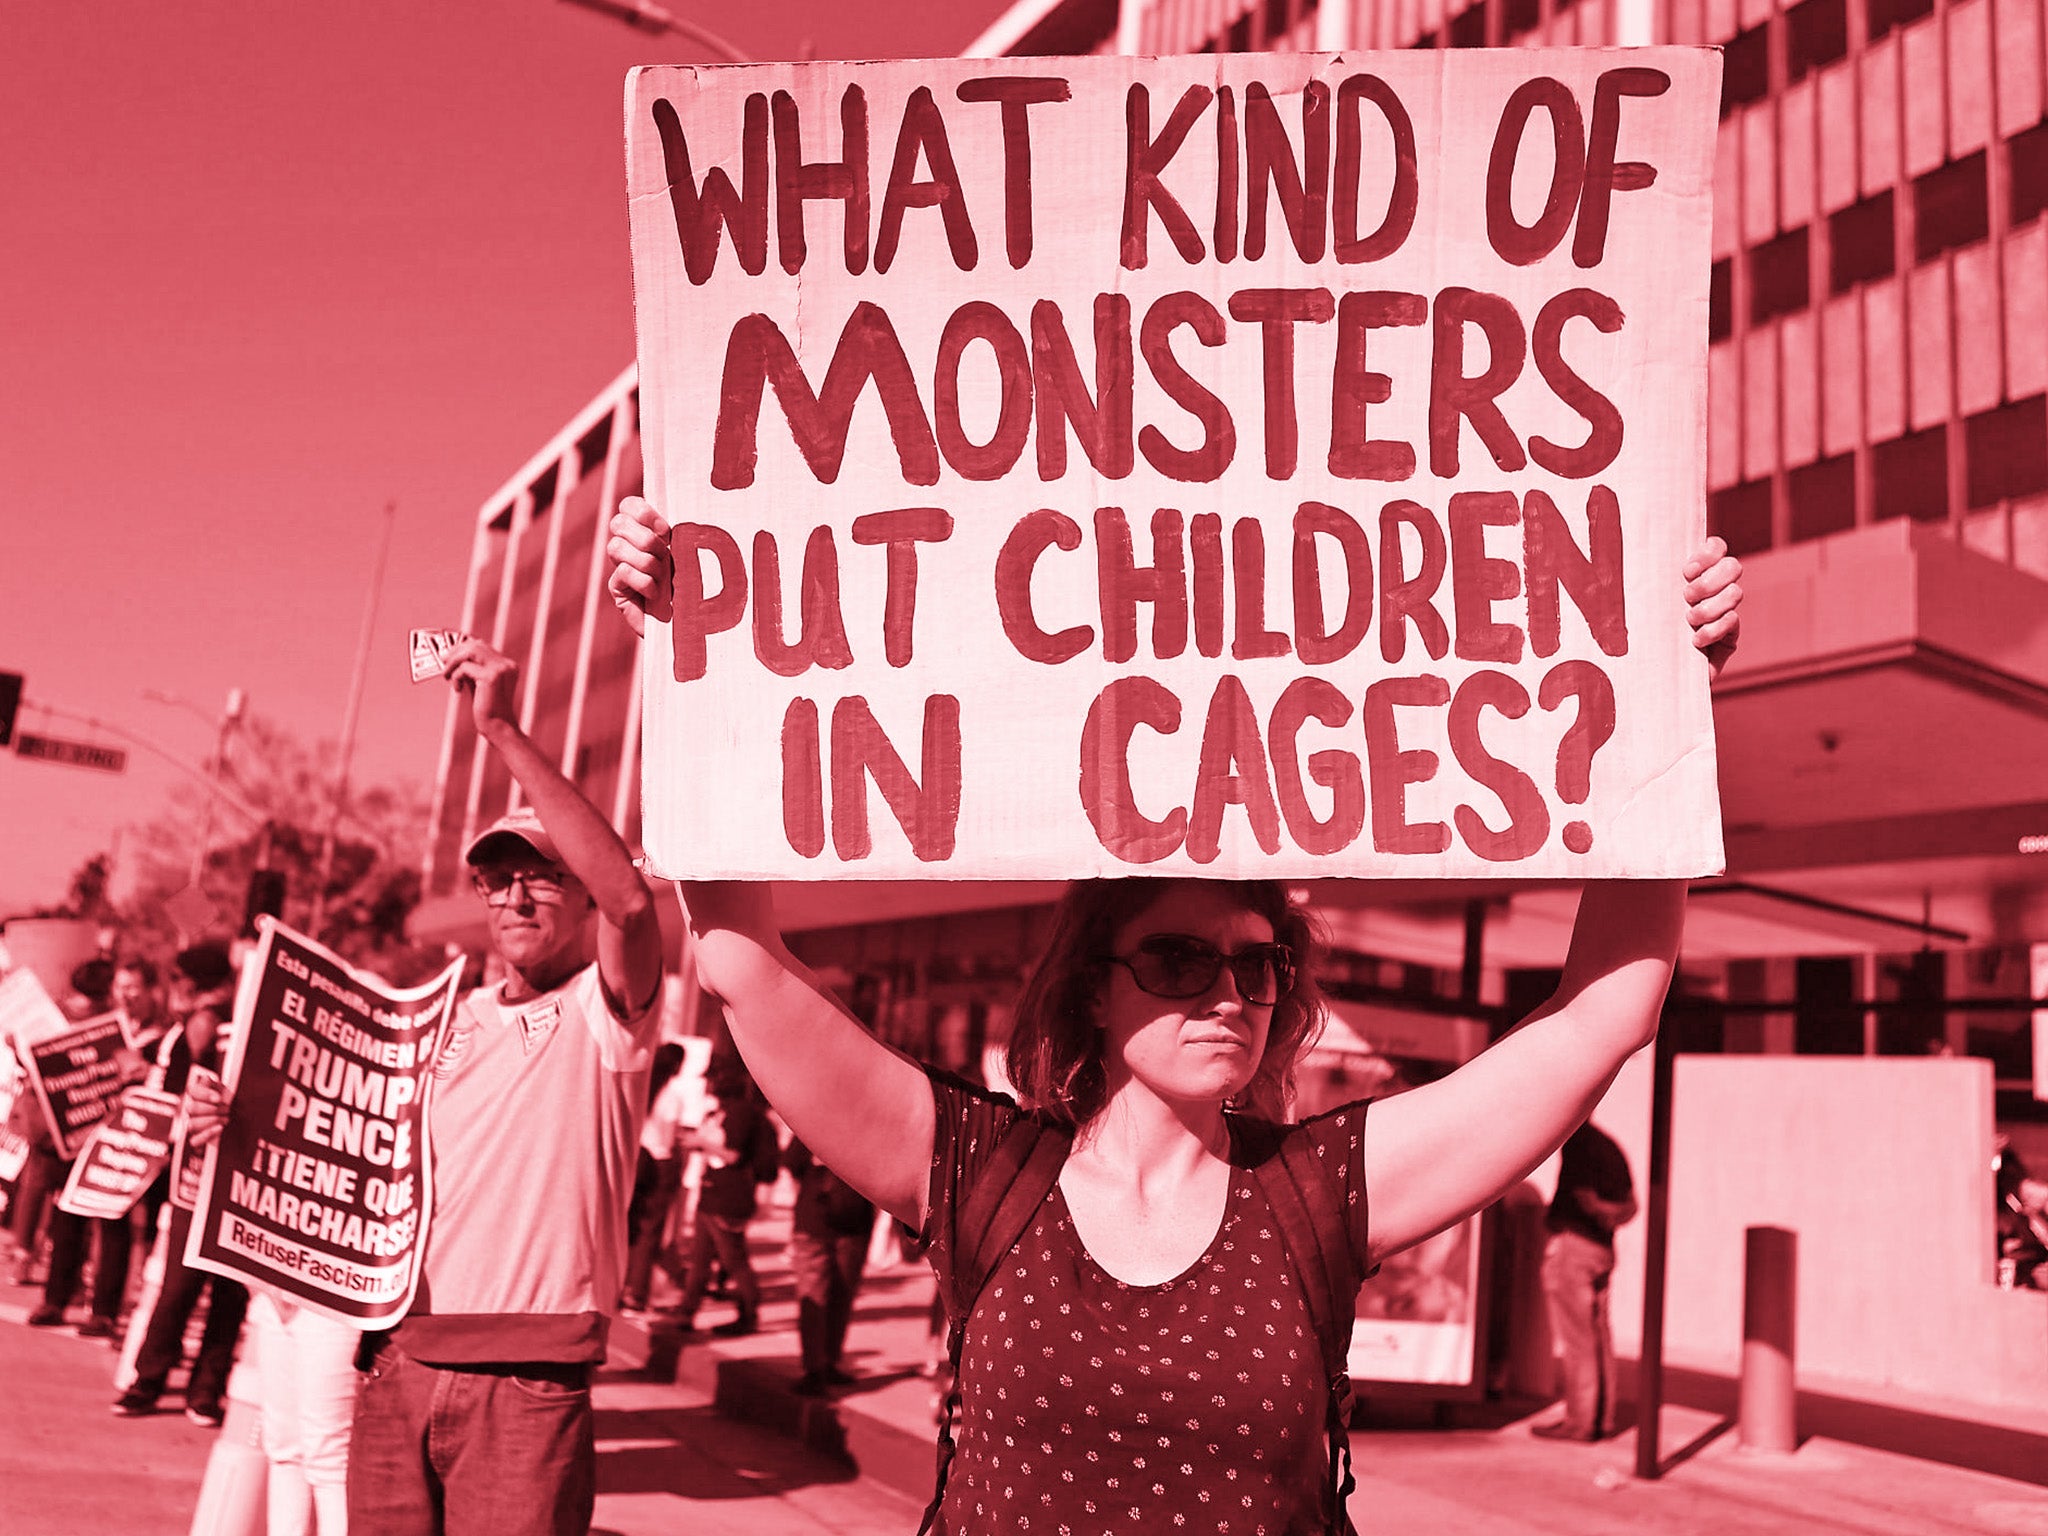 Protestors demonstrate against the separation of migrant children from their families in front of the Federal Building in Los Angeles, California